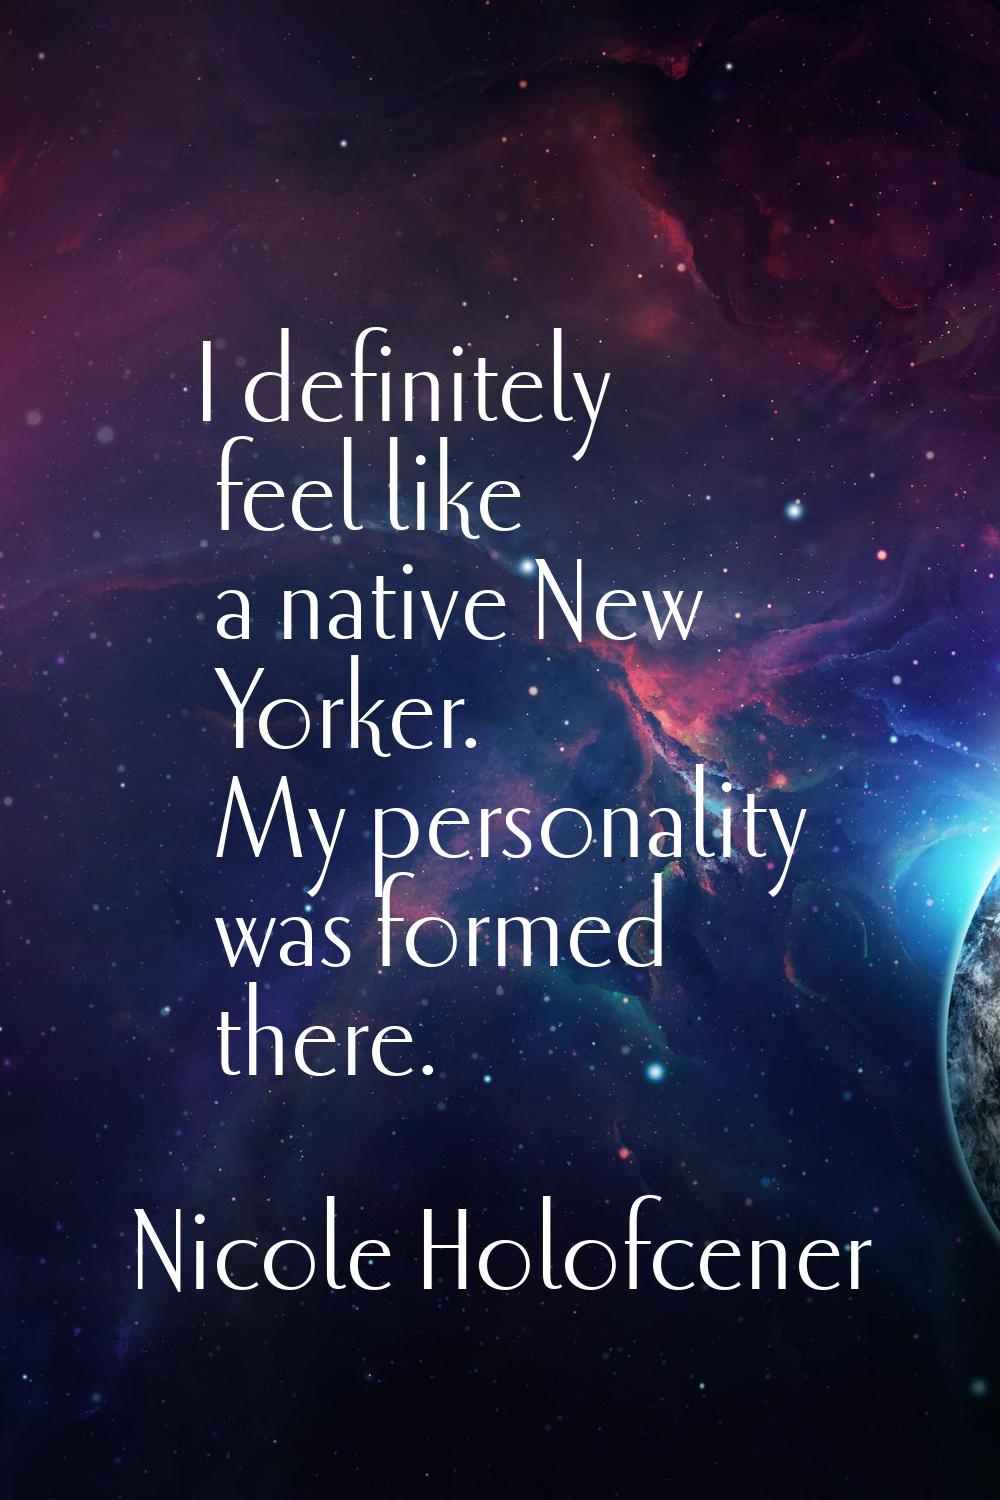 I definitely feel like a native New Yorker. My personality was formed there.